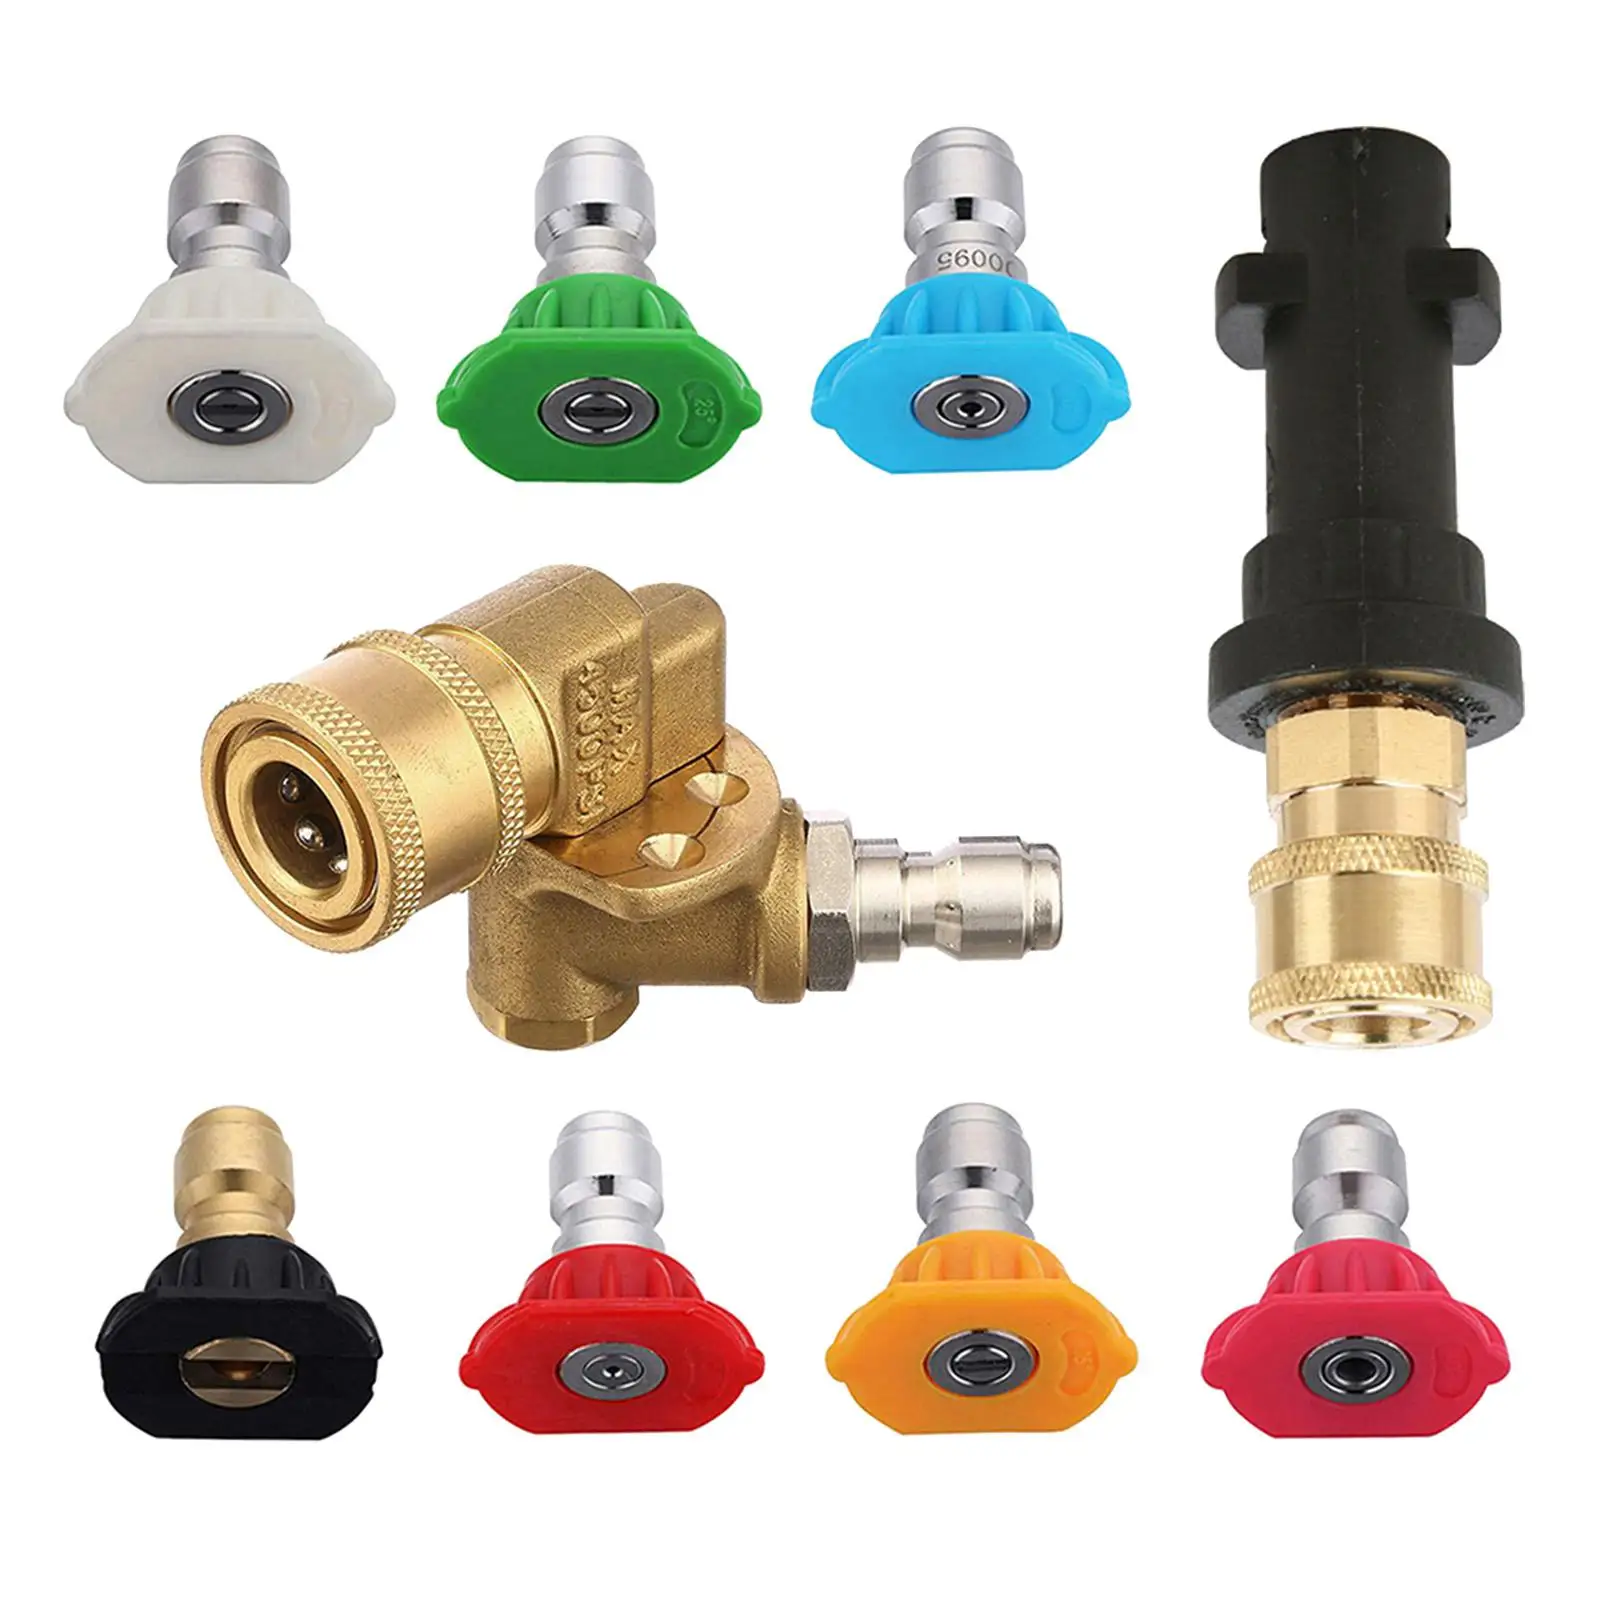 Adjustable Pressure Washer Adapter Set Nozzle Tips Fittings for K2 K7